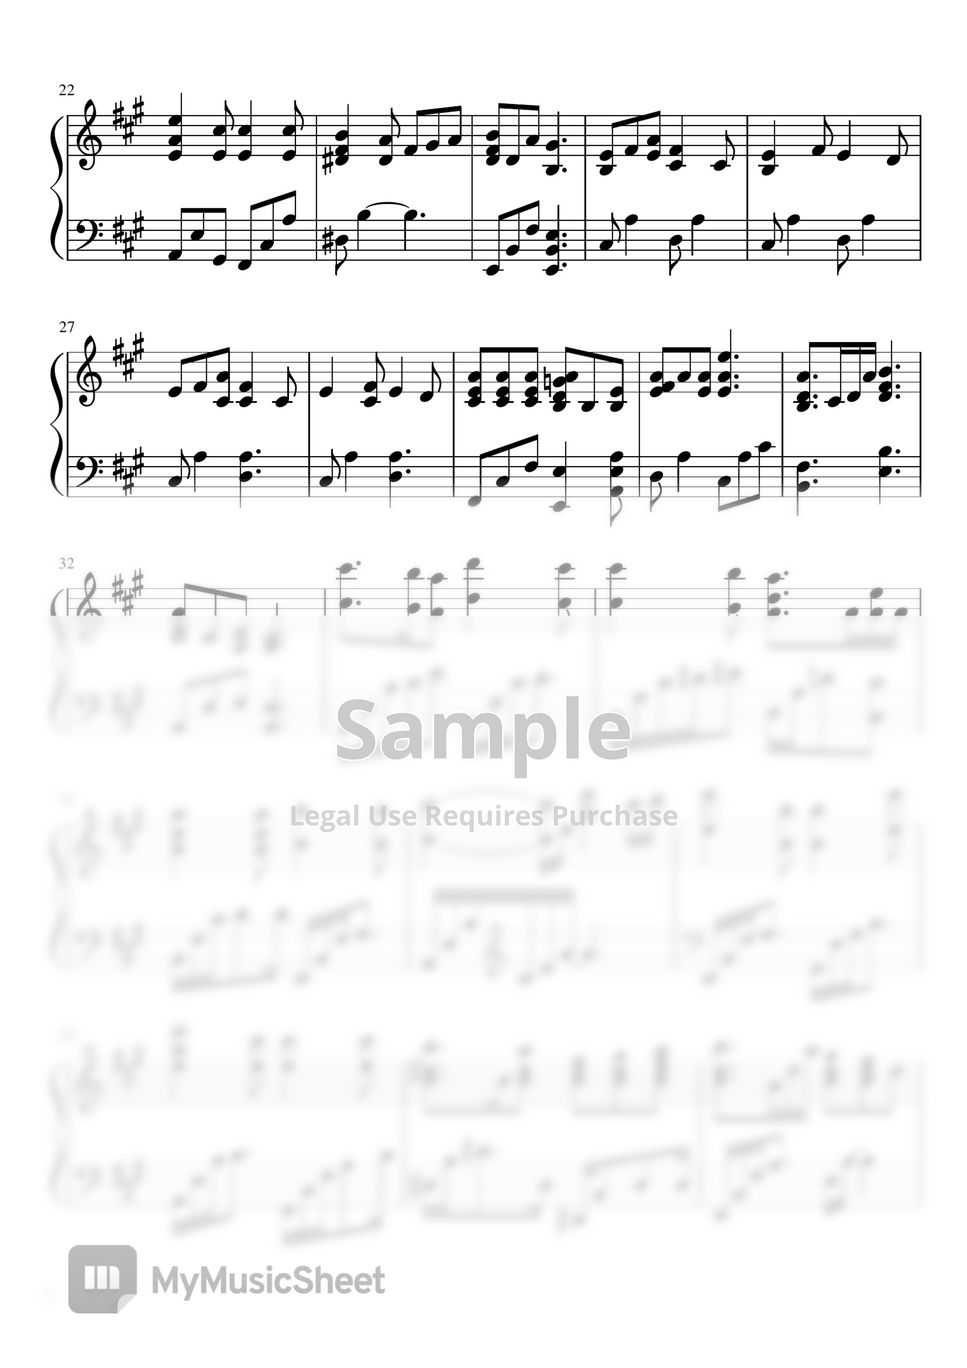 Hymn - Jesus is All the World to Me by Blending Note